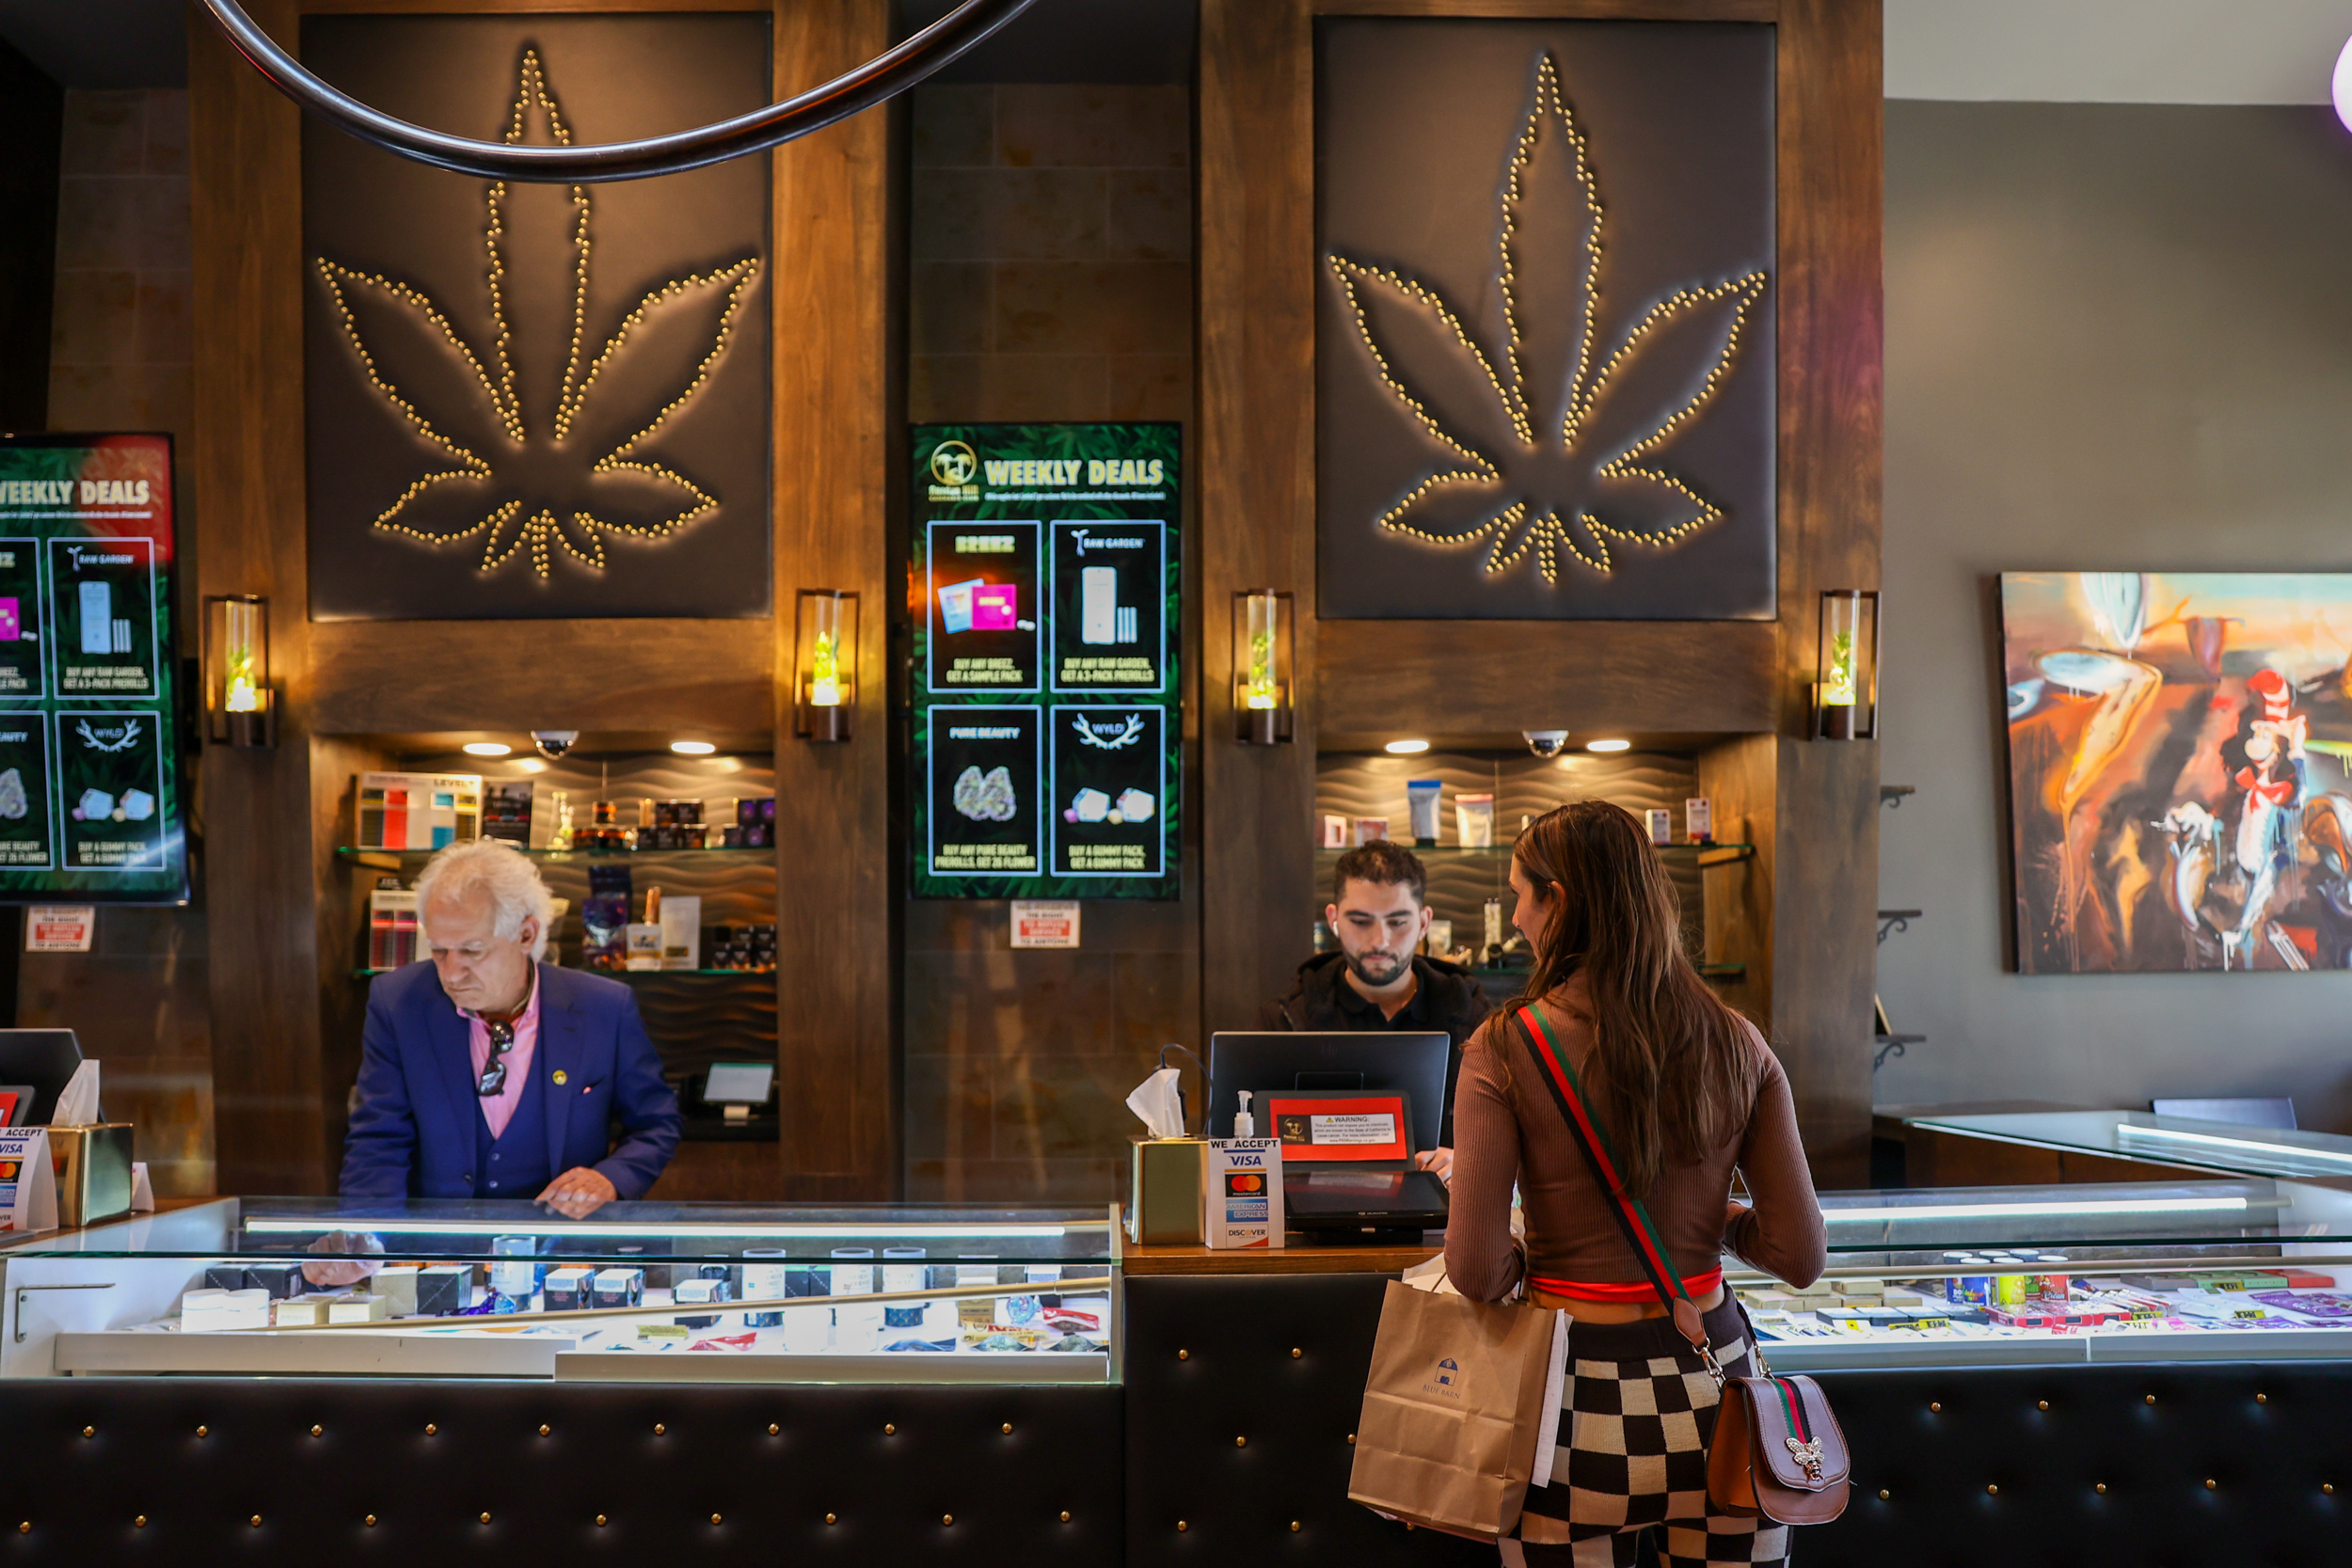 The interior of a cannabis shop with customers and employees